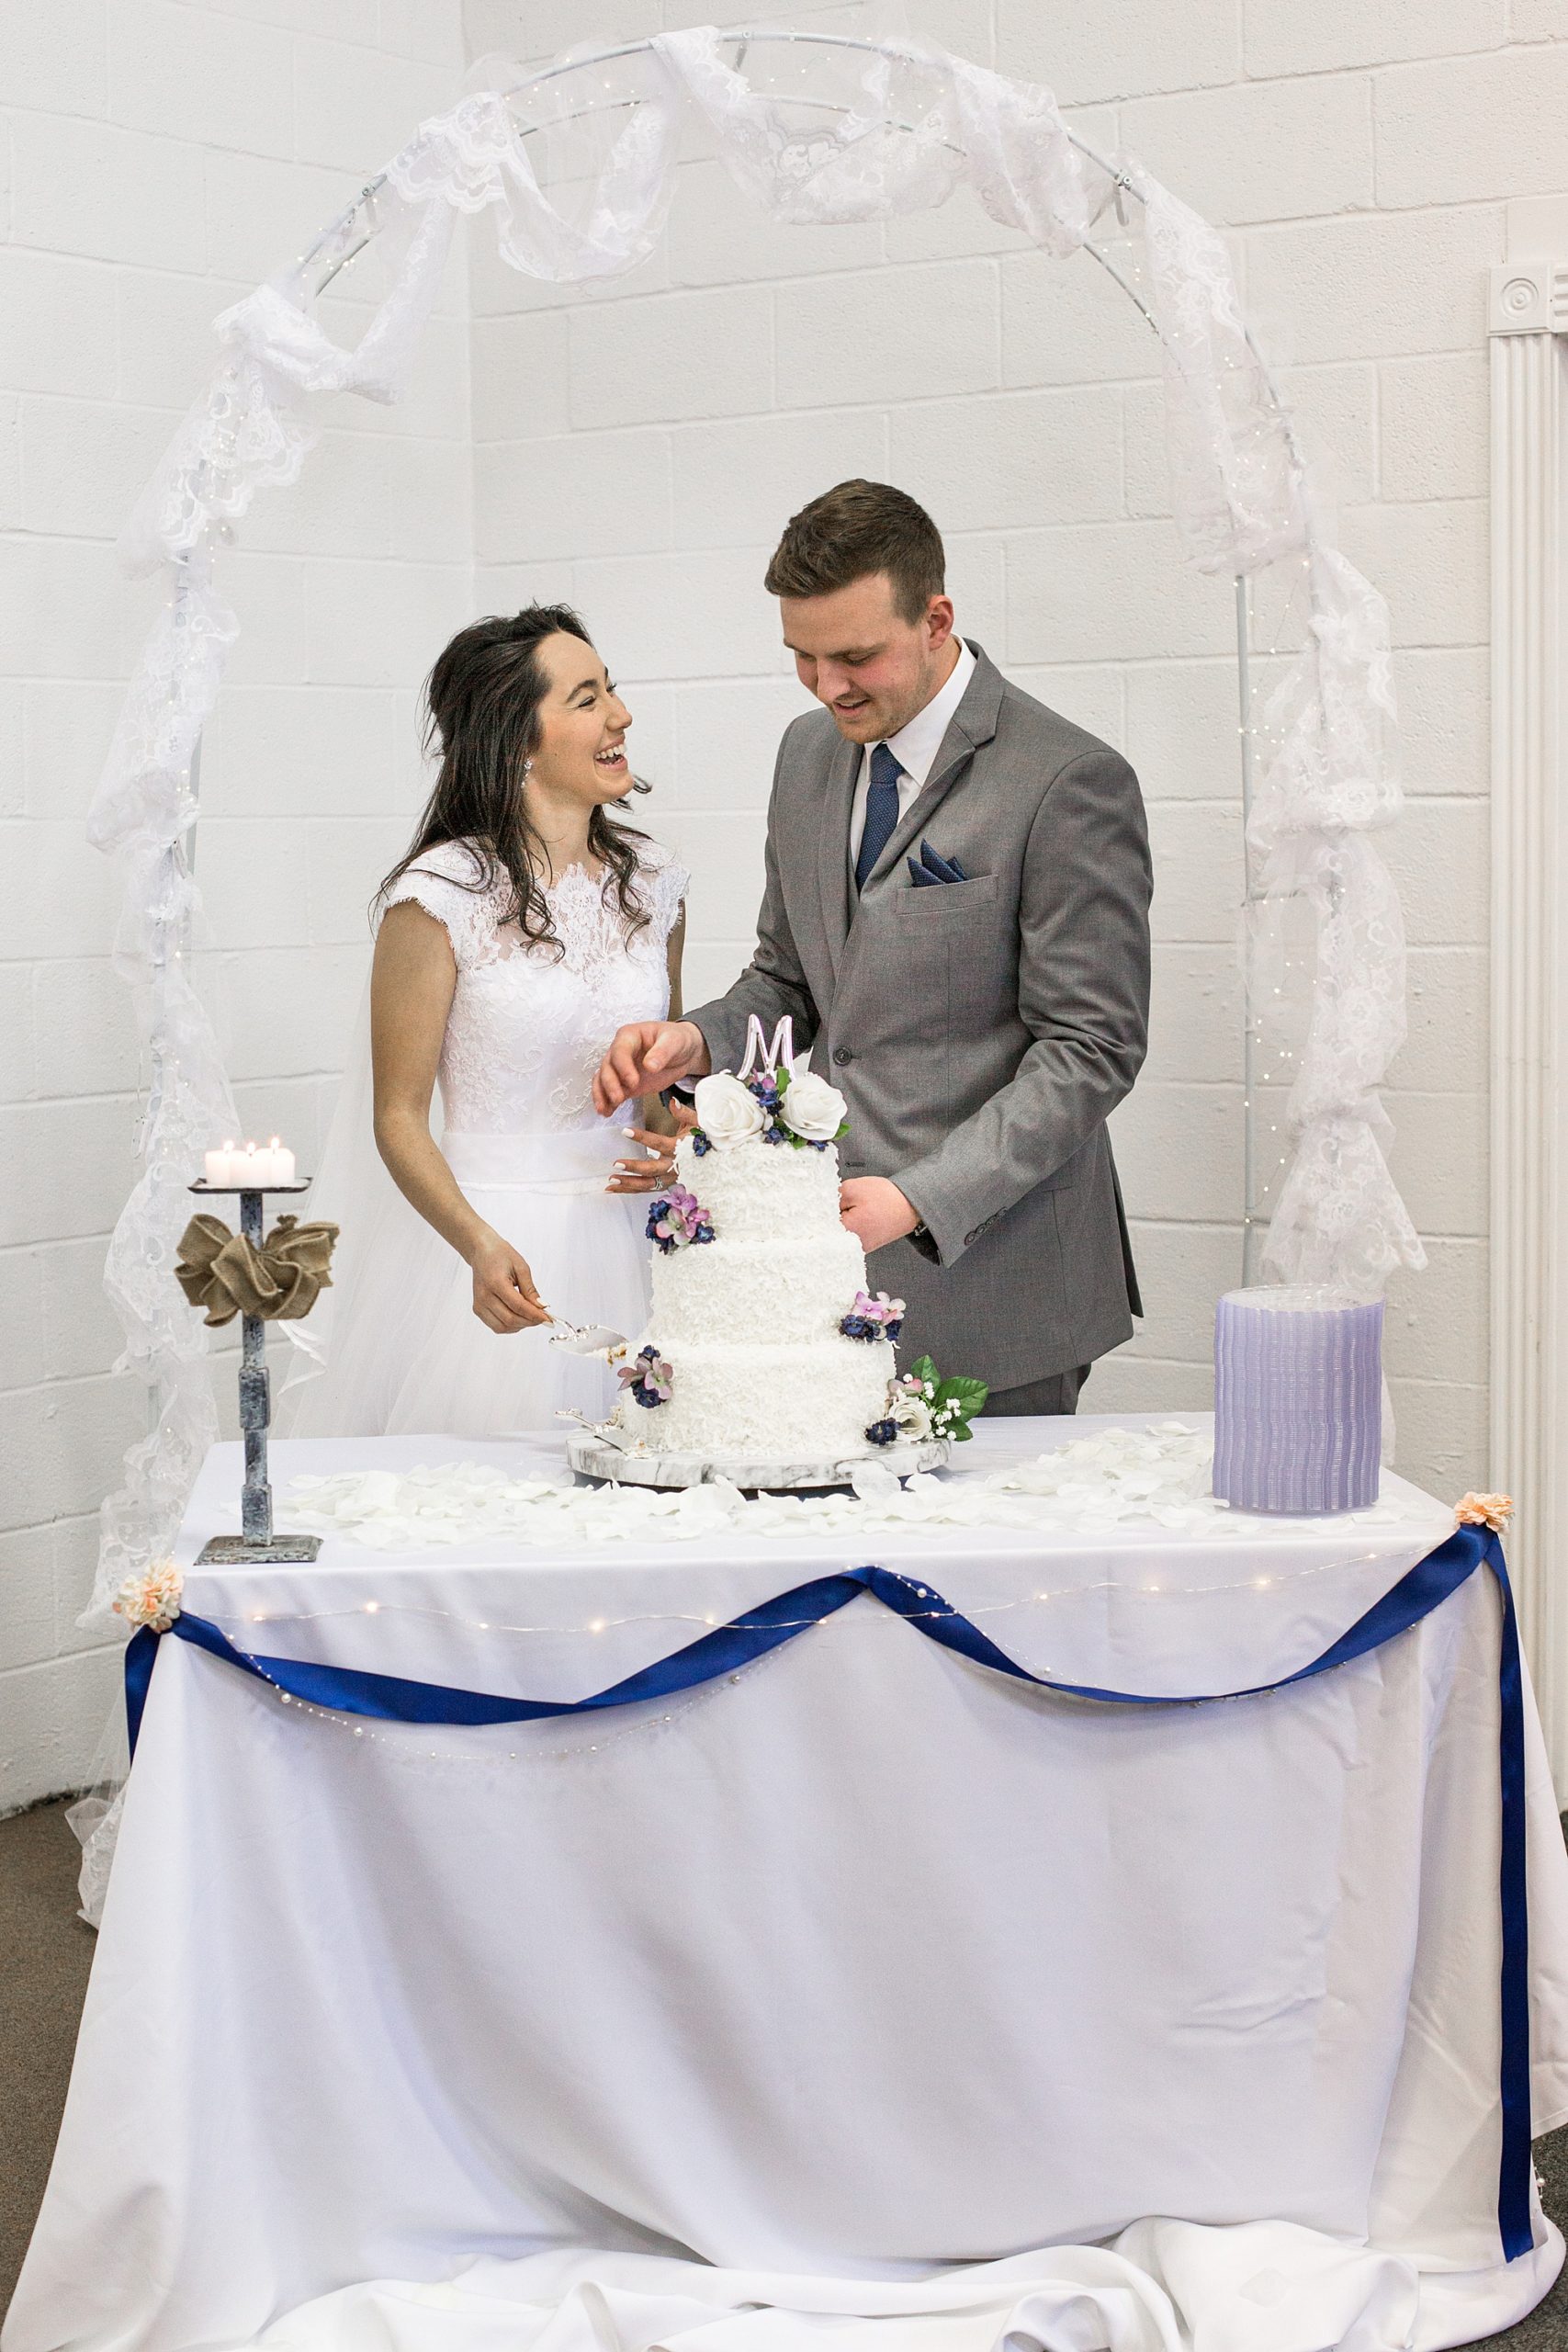 newlyweds cut wedding cake together during winter wedding in Middle Tennessee